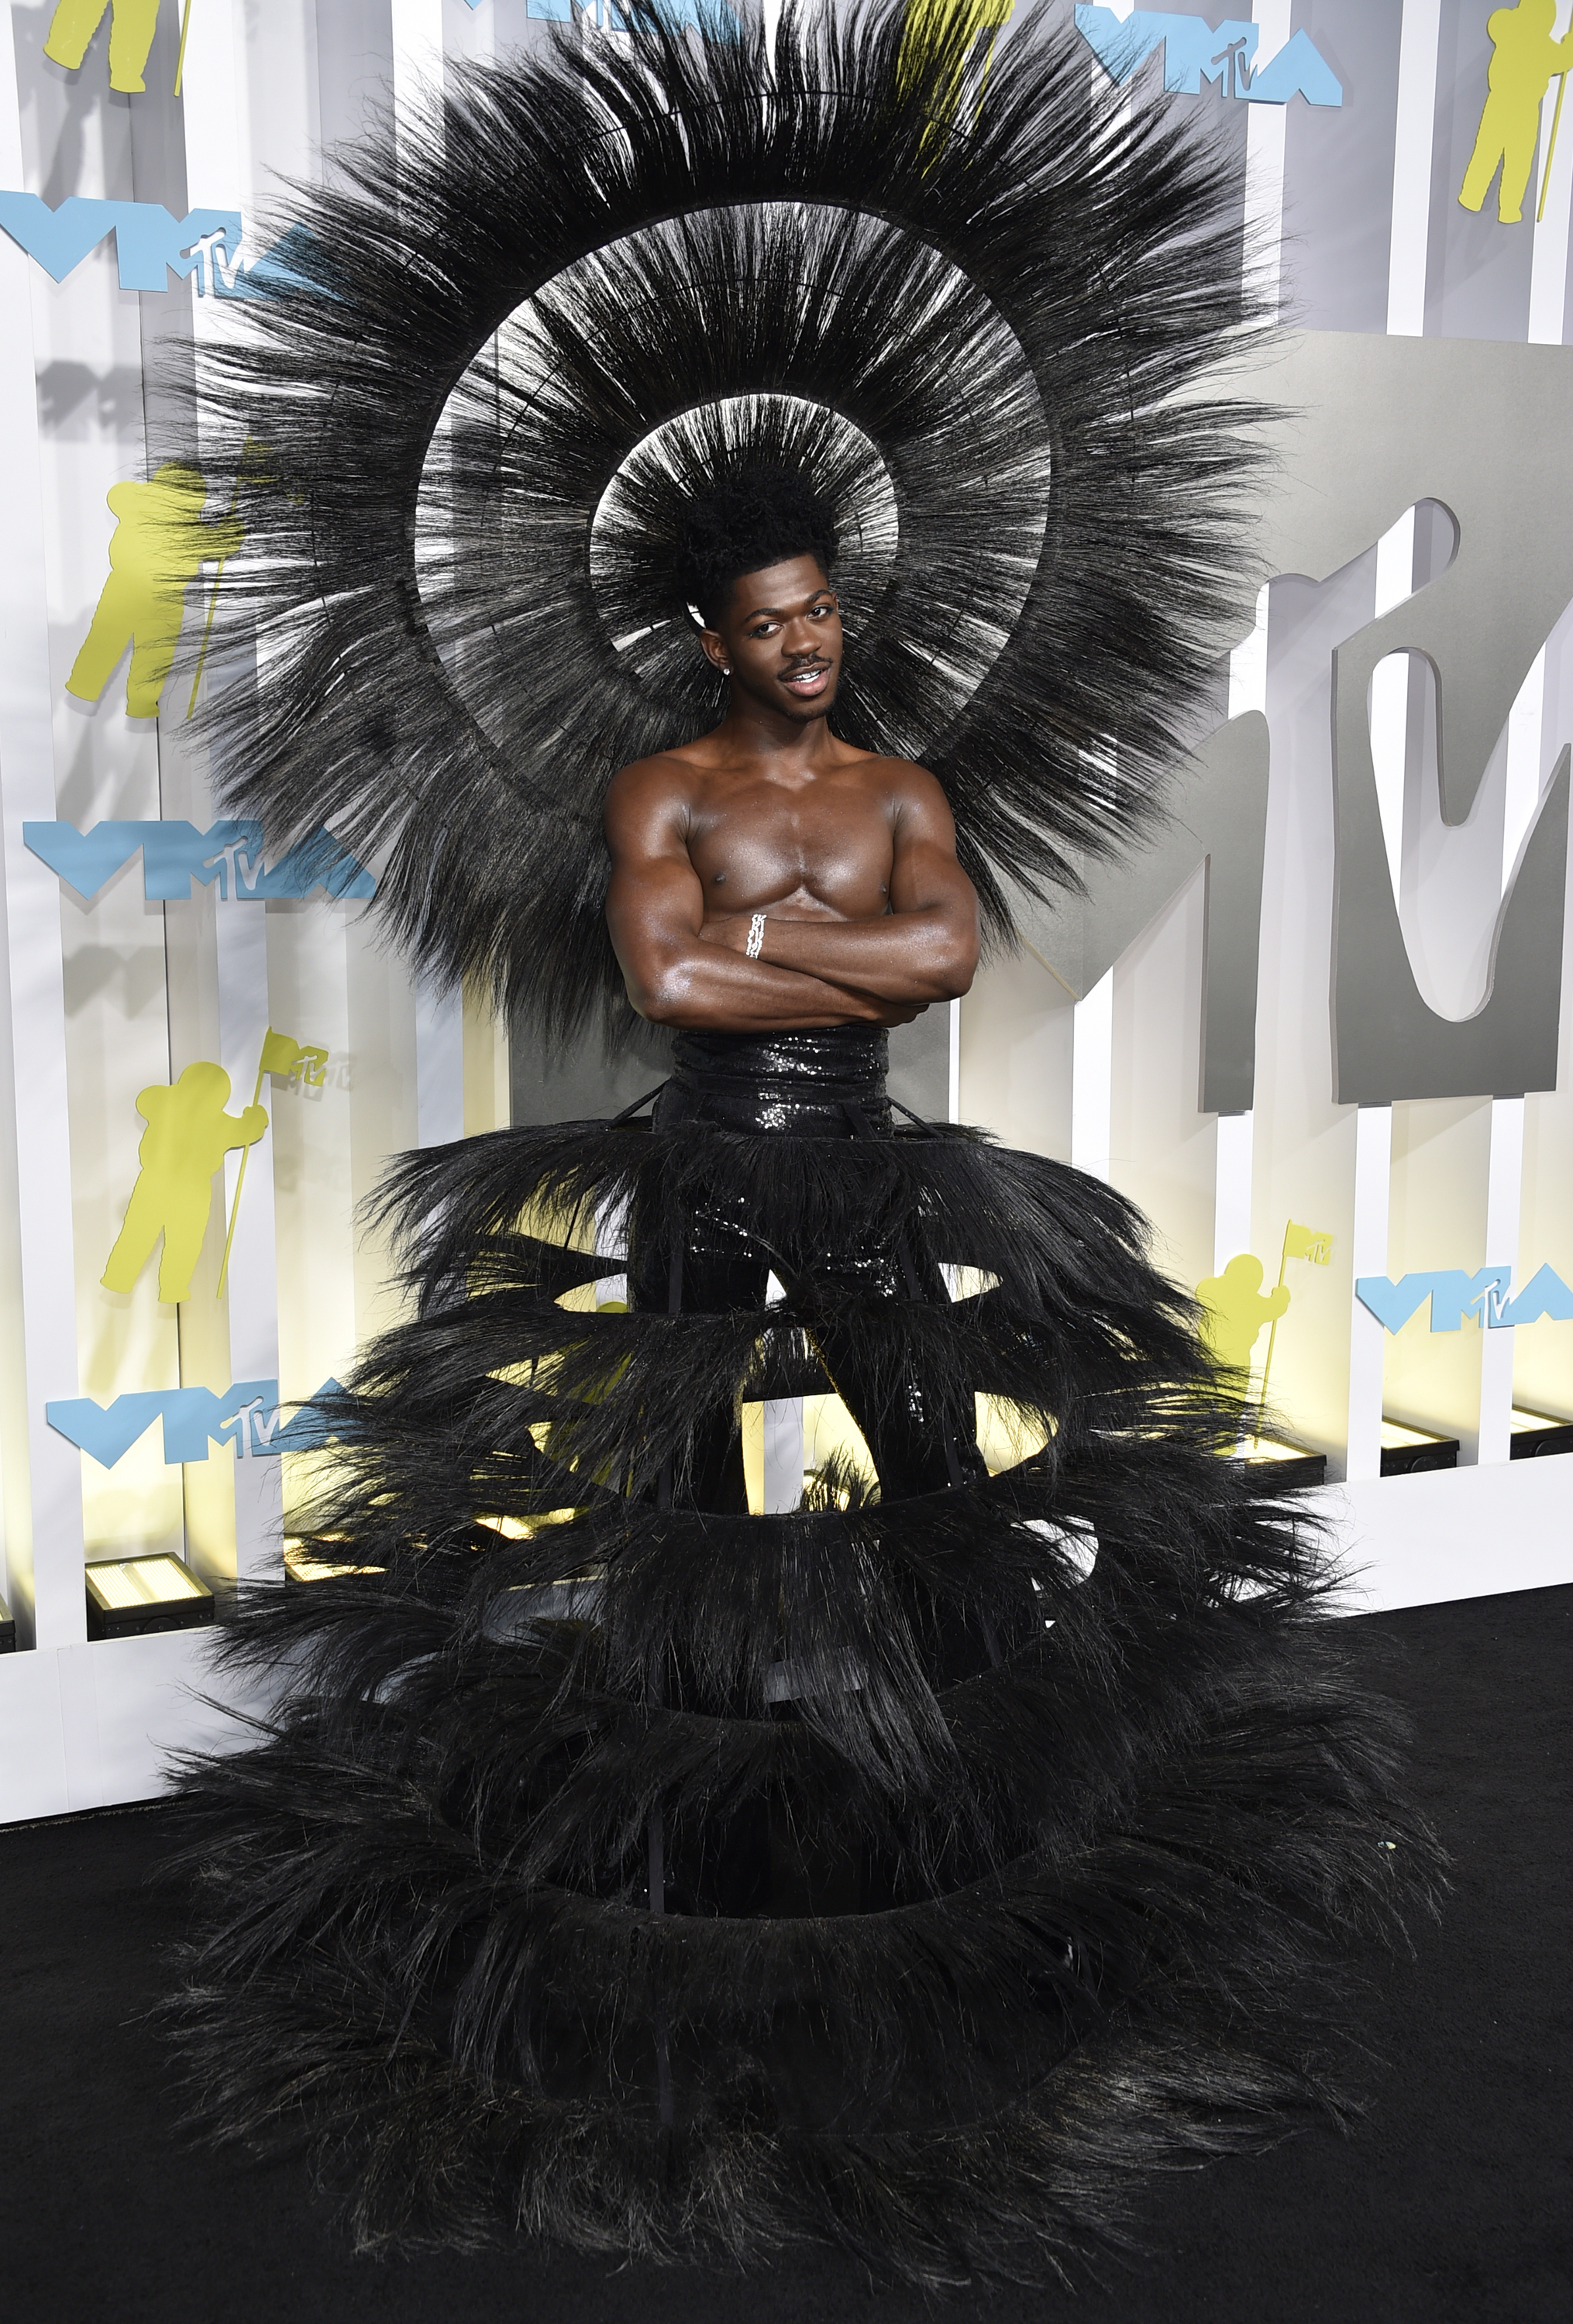 lil nas x poses with crossed arms on the vmas red carpet wearing a massive black spiky headpiece and black feathery skirt